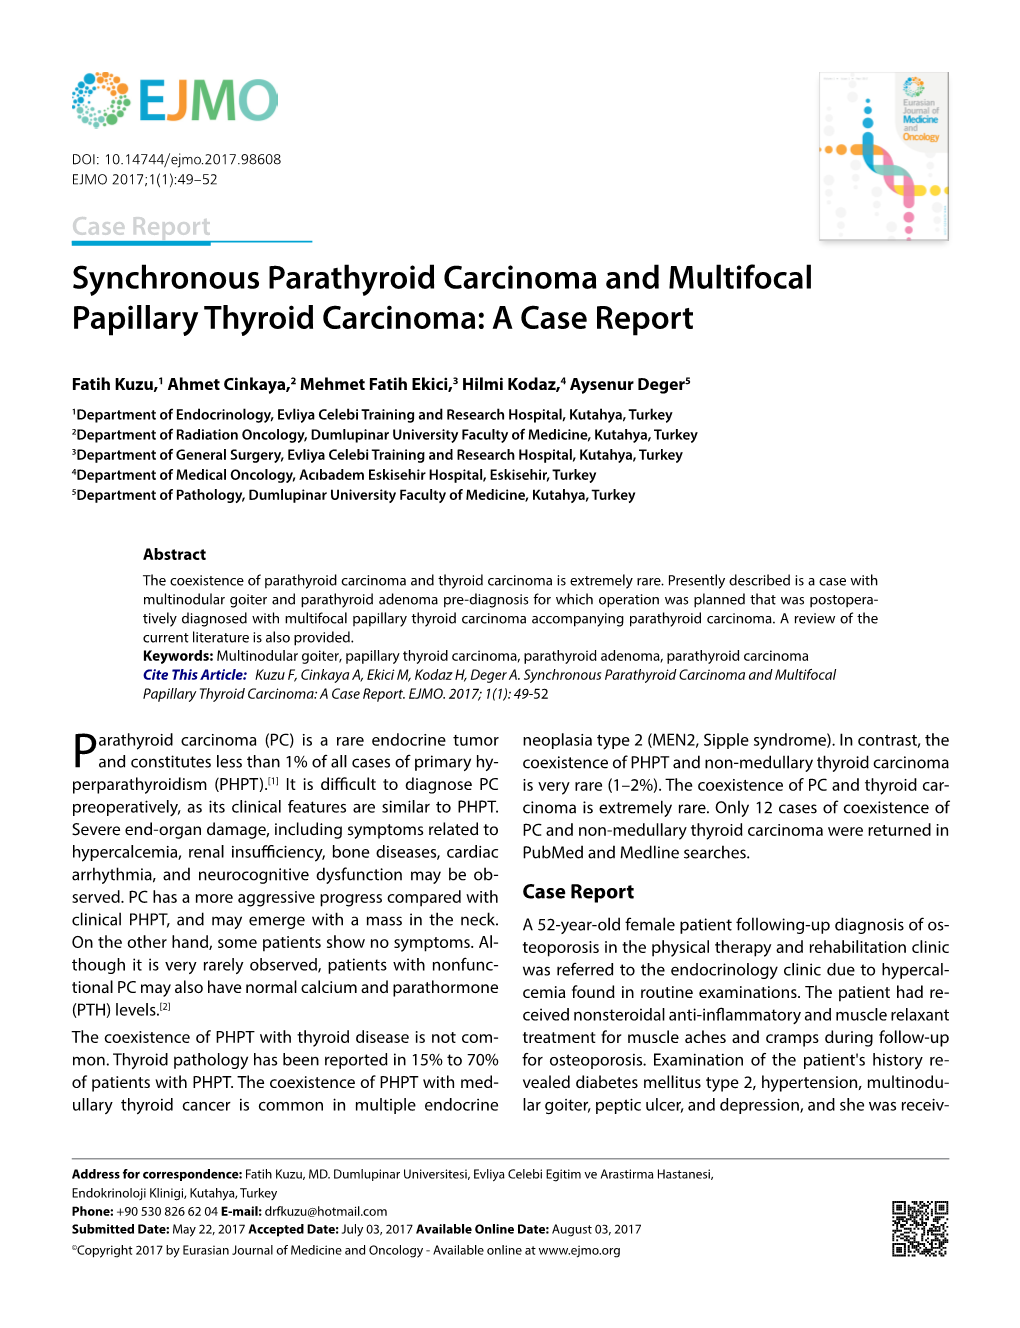 Synchronous Parathyroid Carcinoma and Multifocal Papillary Thyroid Carcinoma: a Case Report